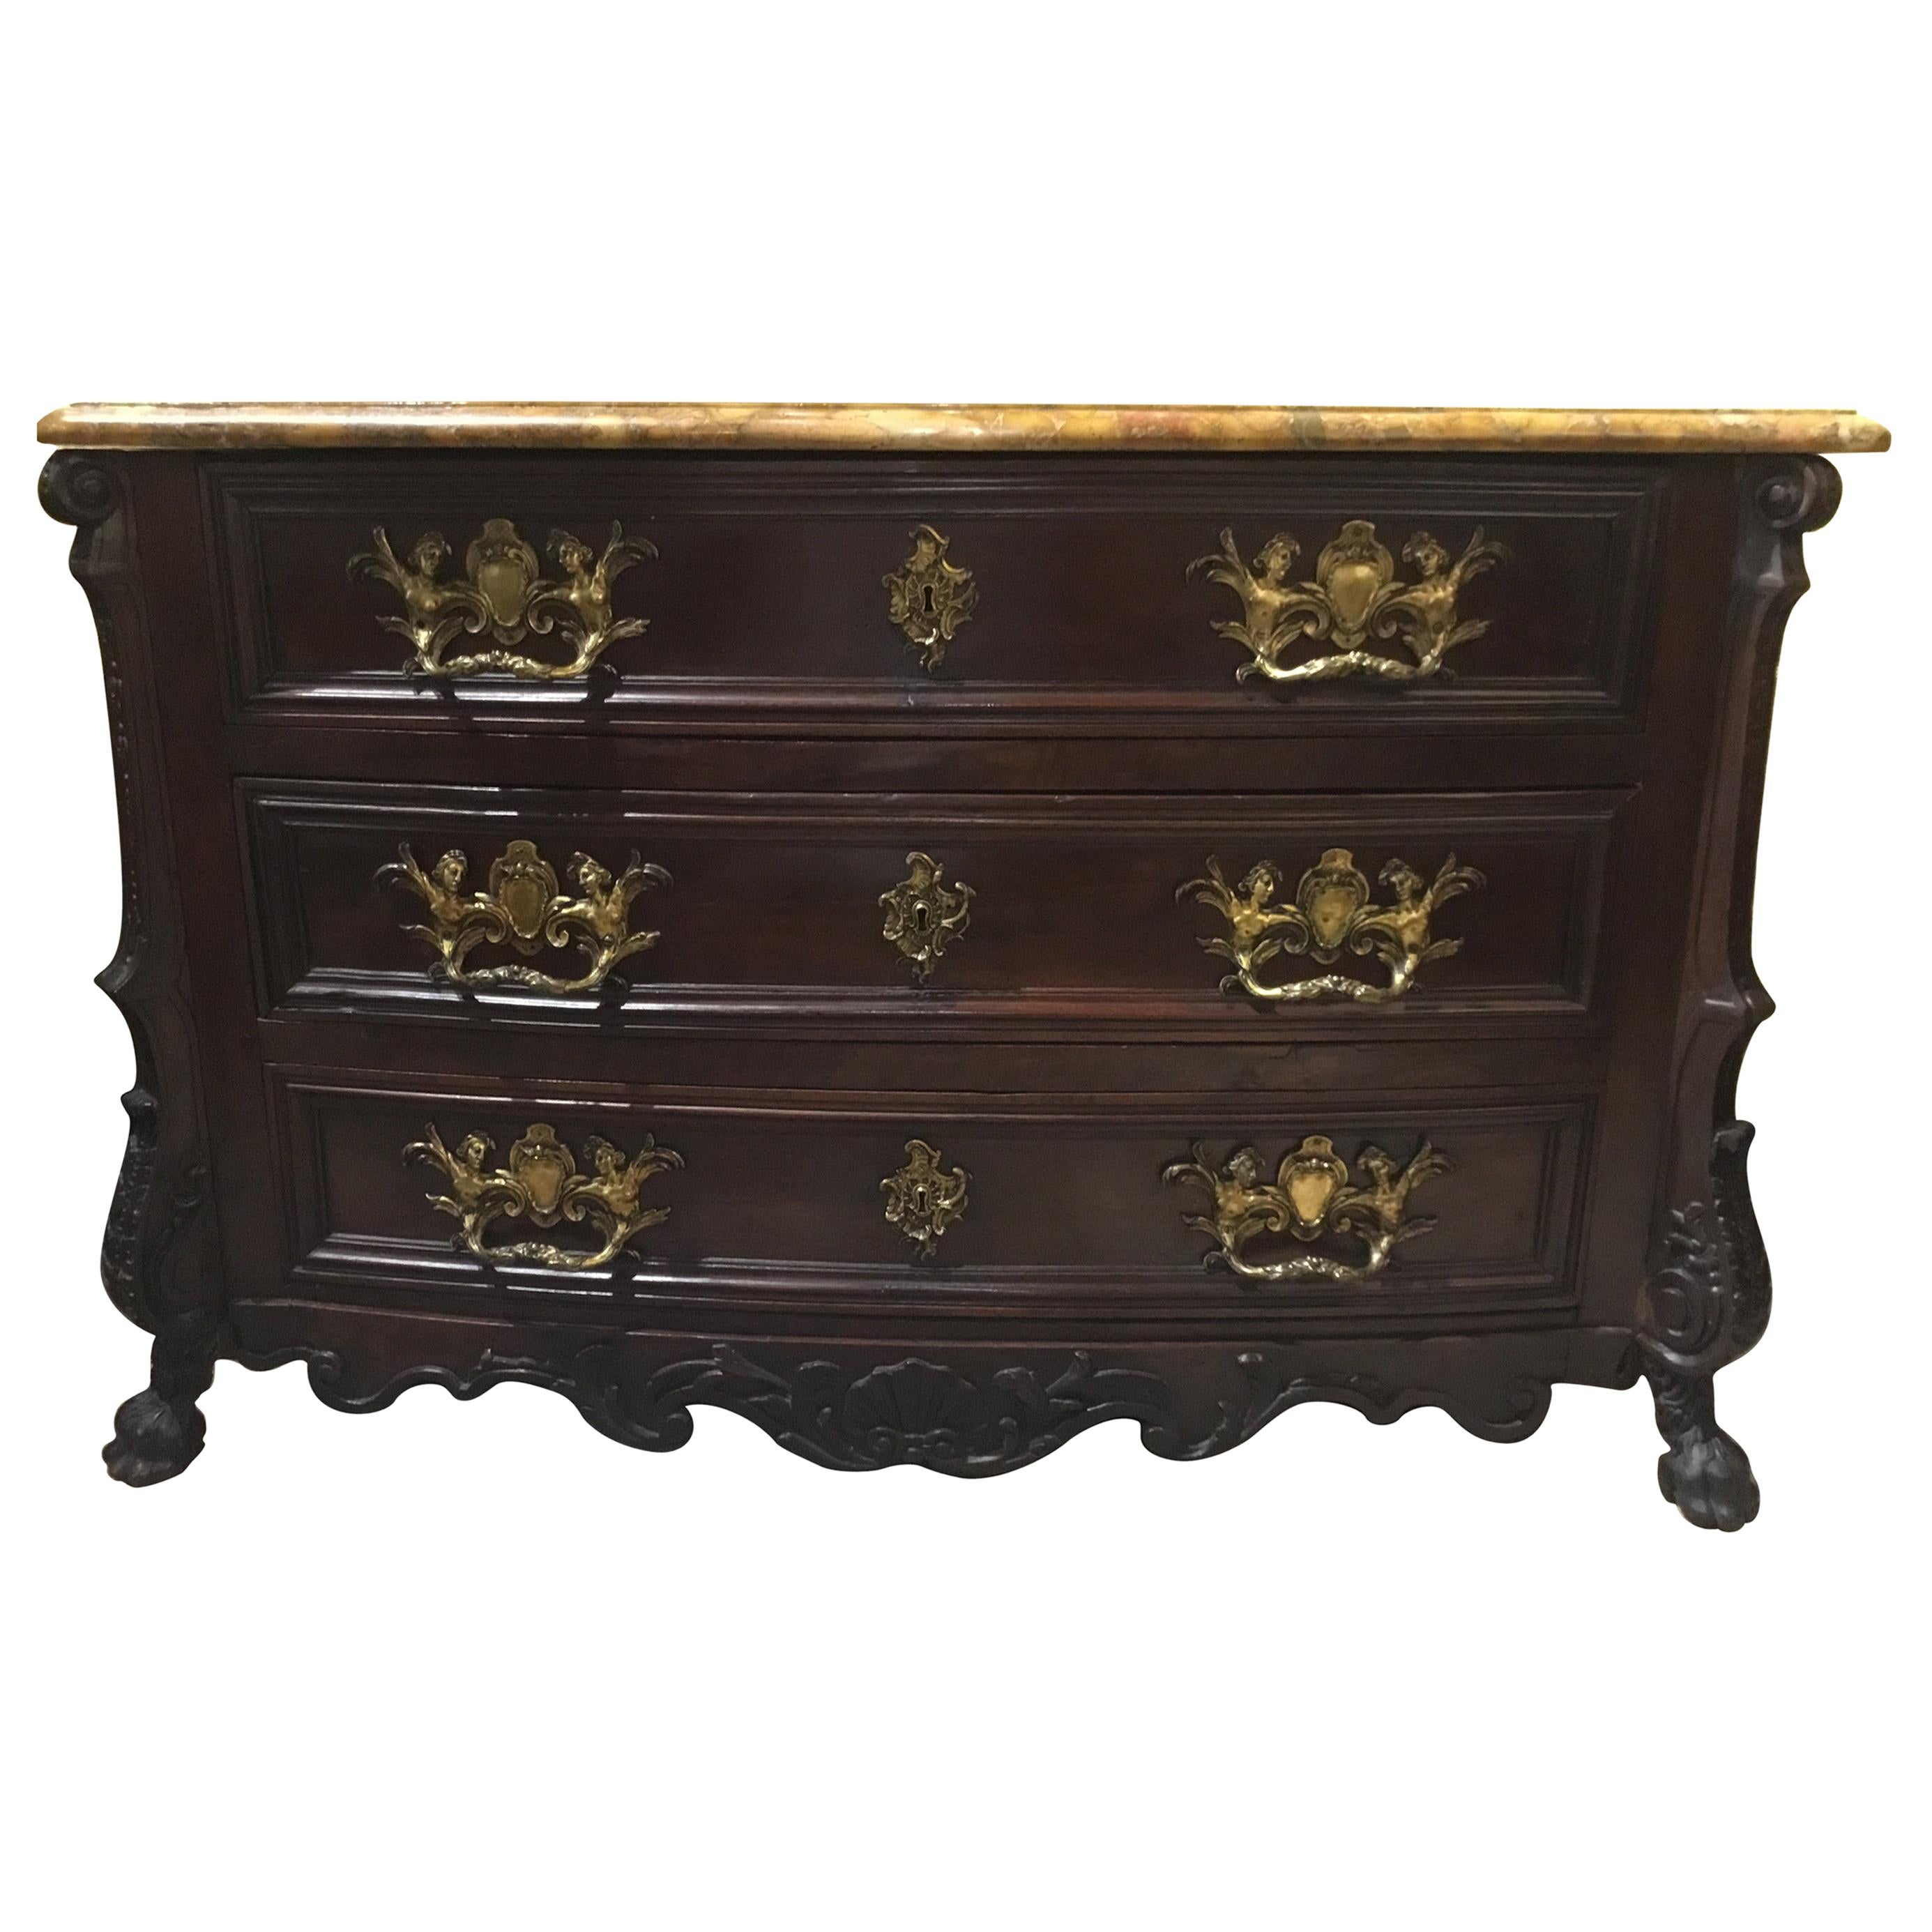 19th Century German Chest/Commode in Rosewood with Exotic Marble Top